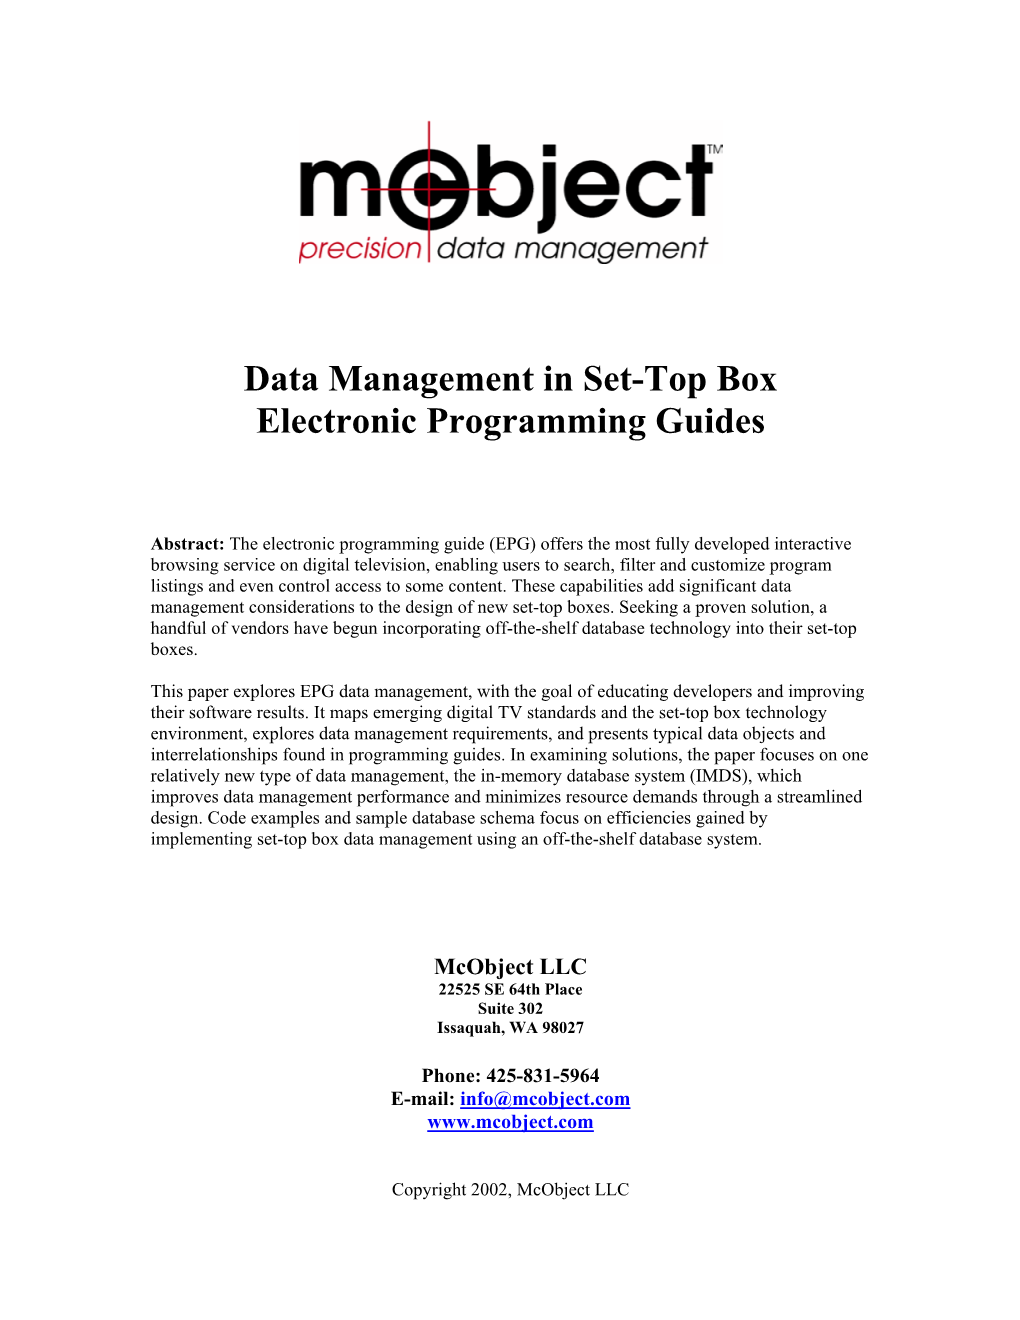 Data Management in Set-Top Box Electronic Programming Guides